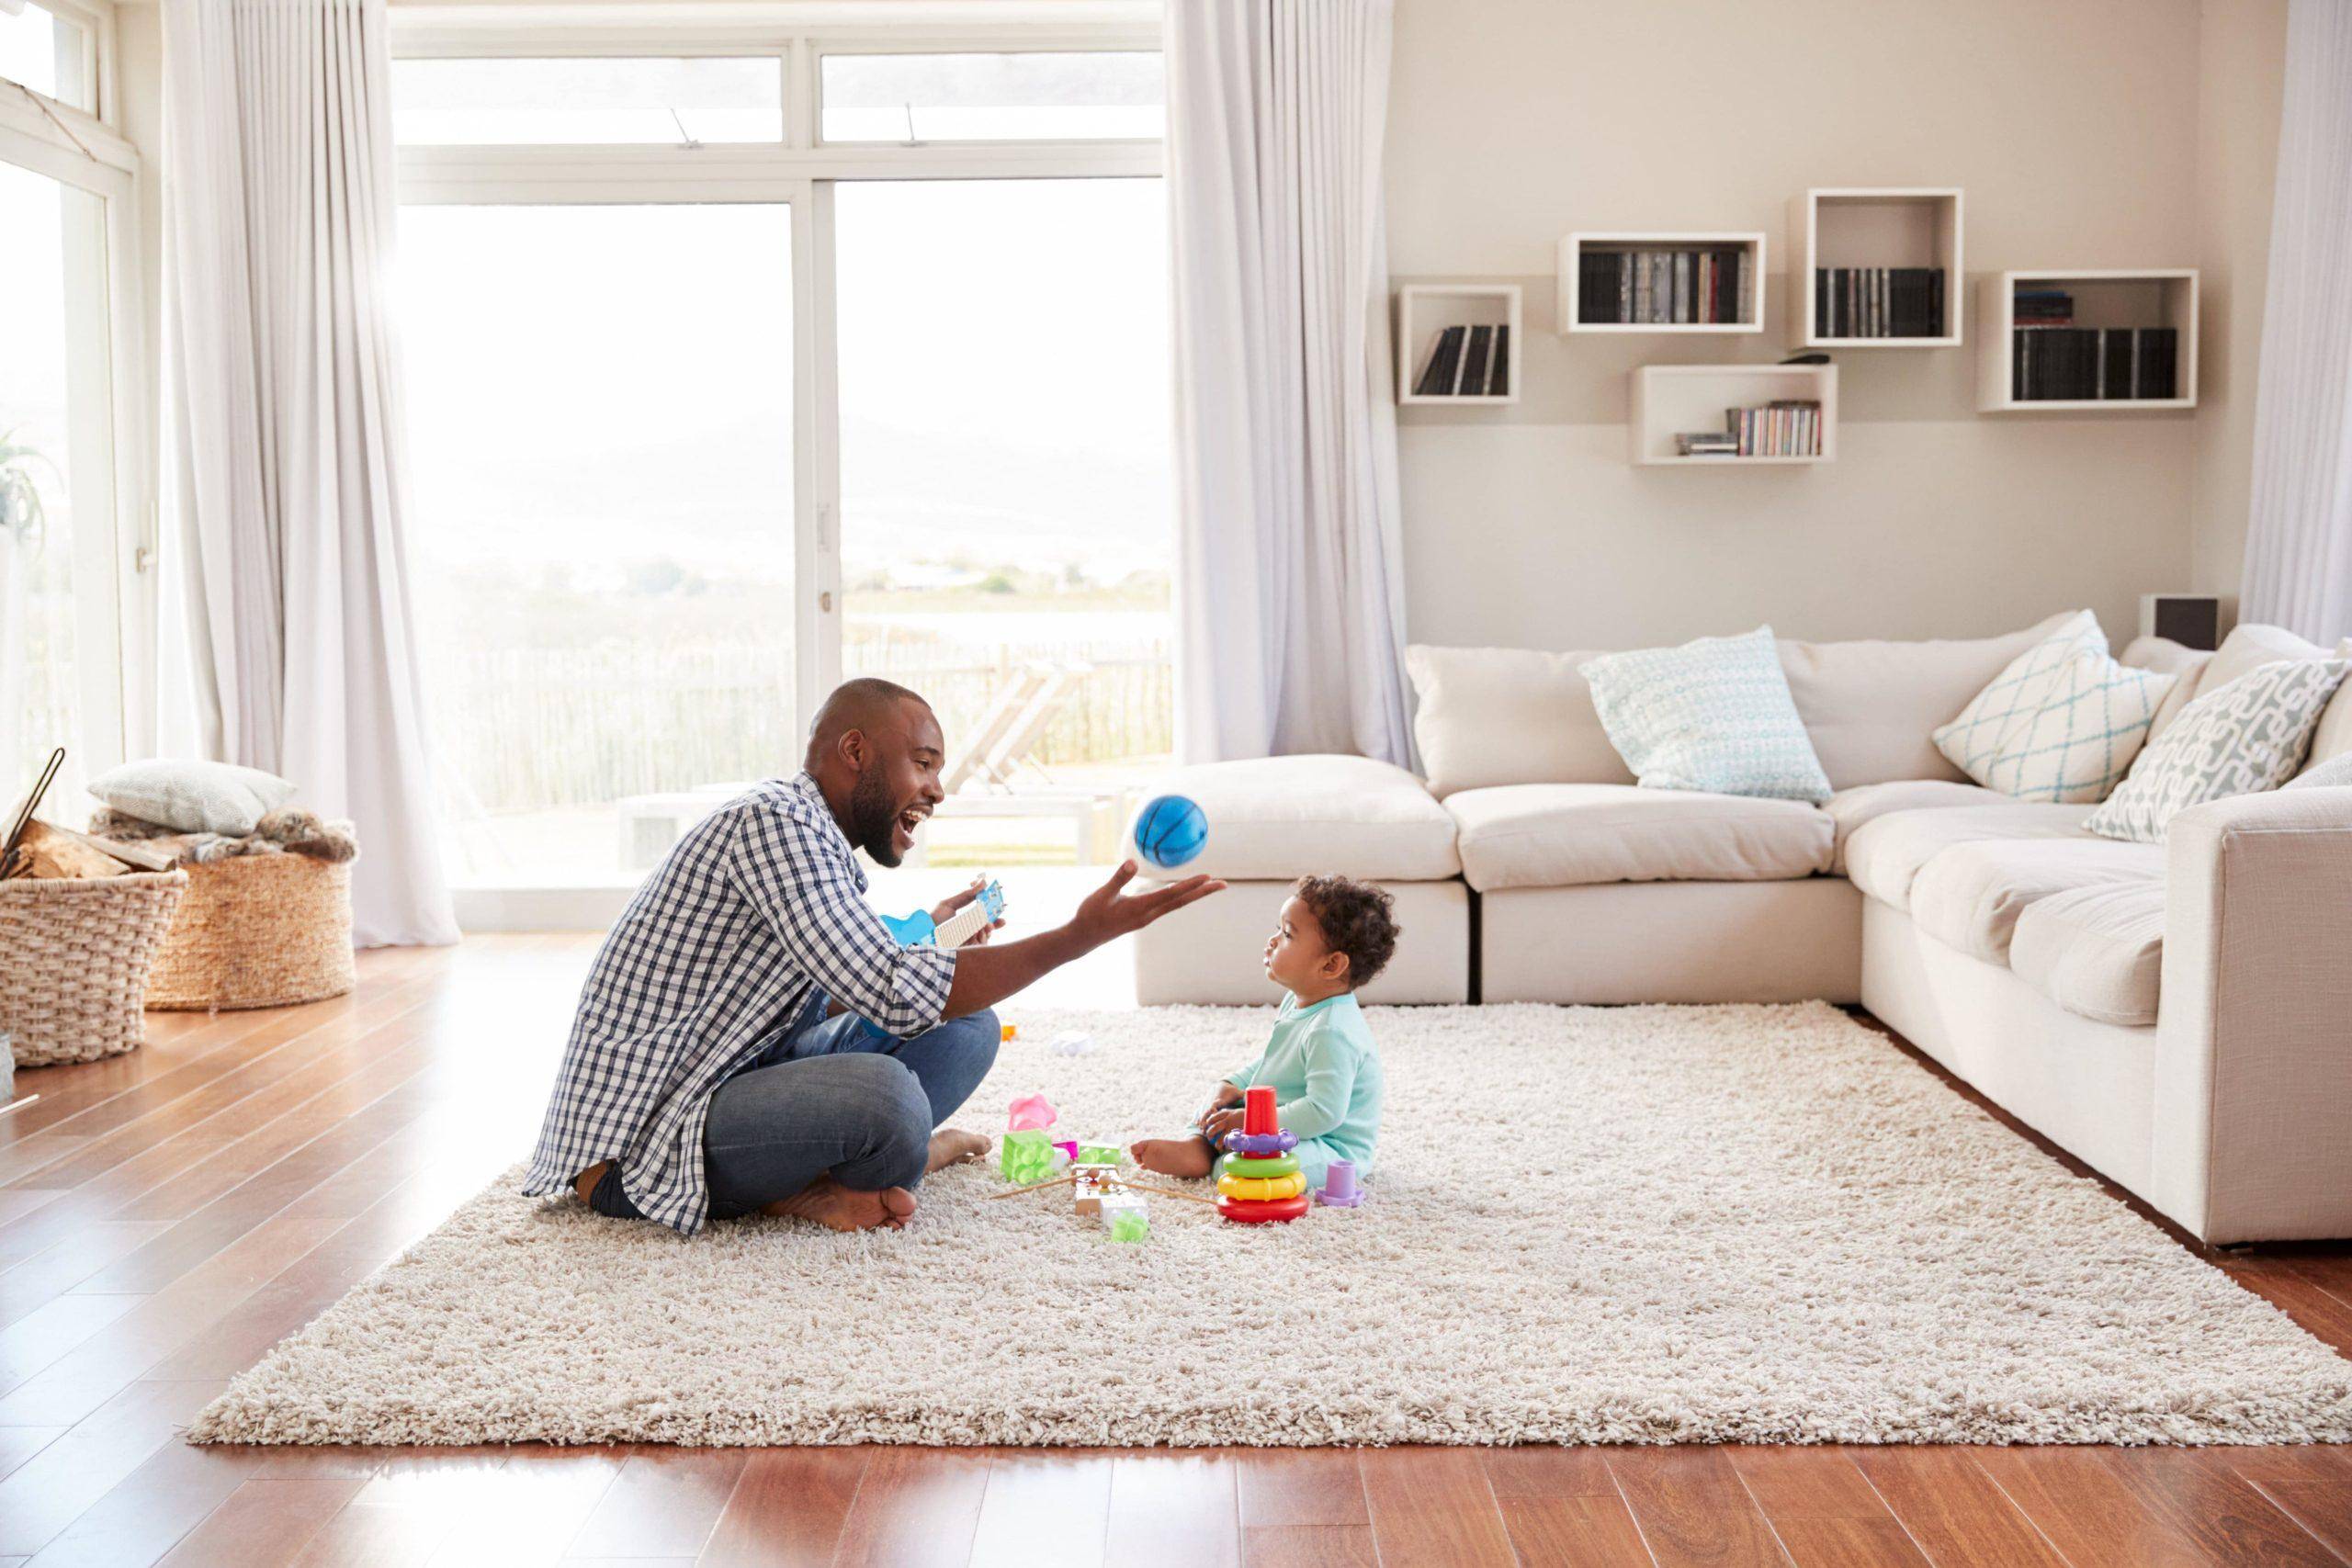 Residential carpet cleaning services that are designed to keep your home looking its best.